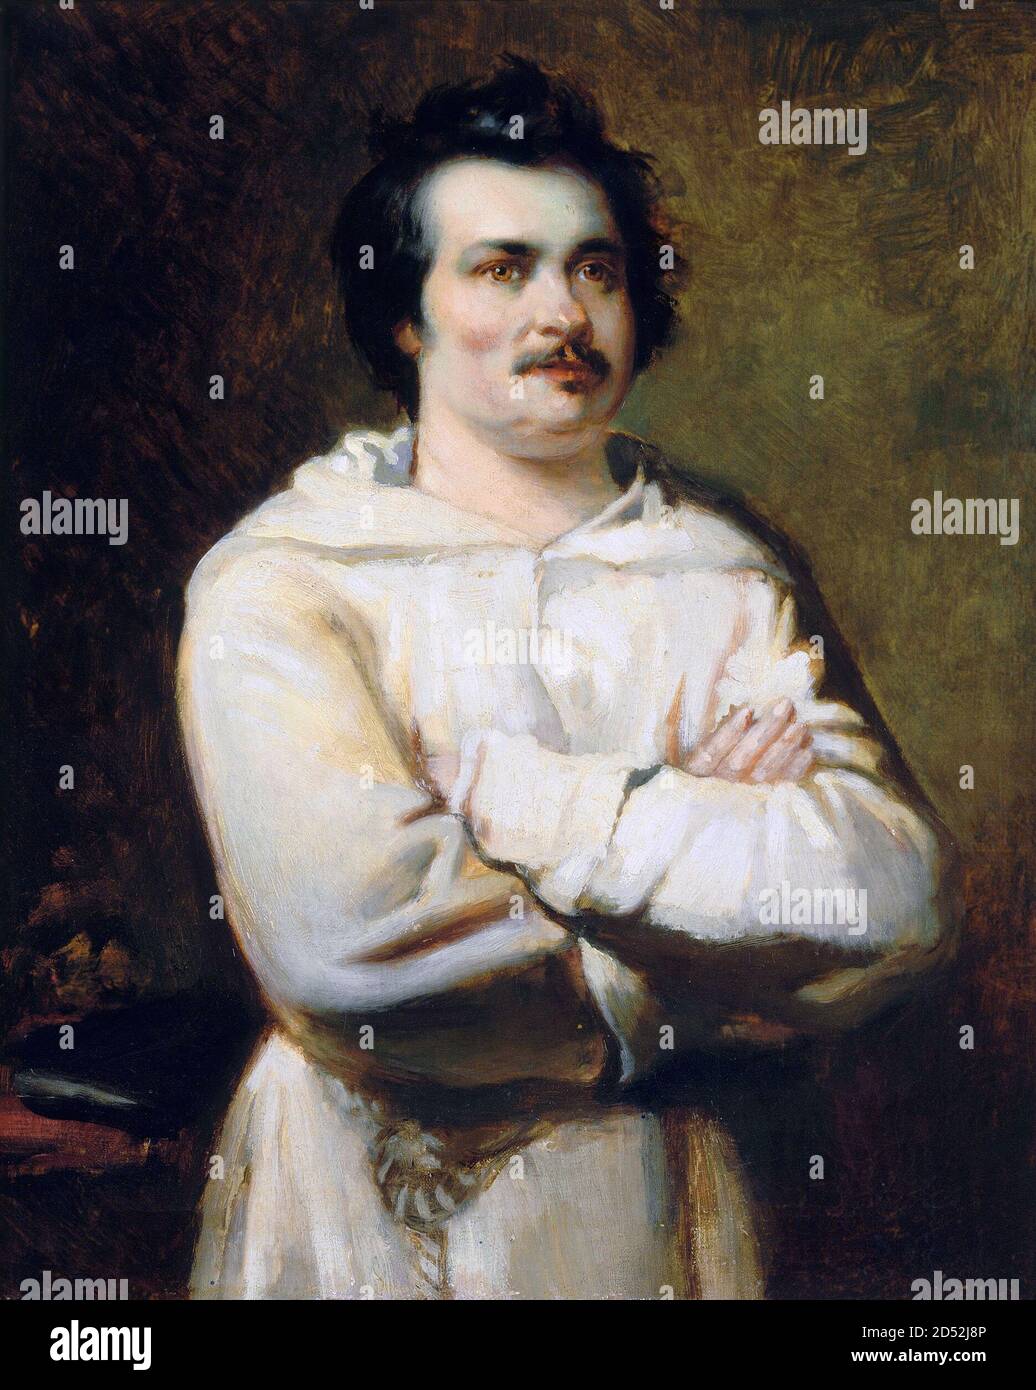 Honoré de Balzac. Portrait of the French novelist and playwright, Honoré de Balzac (1799-1850) by Maxime Dastugue,  after a painting by Louis Boulanger, oil on canvas, 1886 Stock Photo